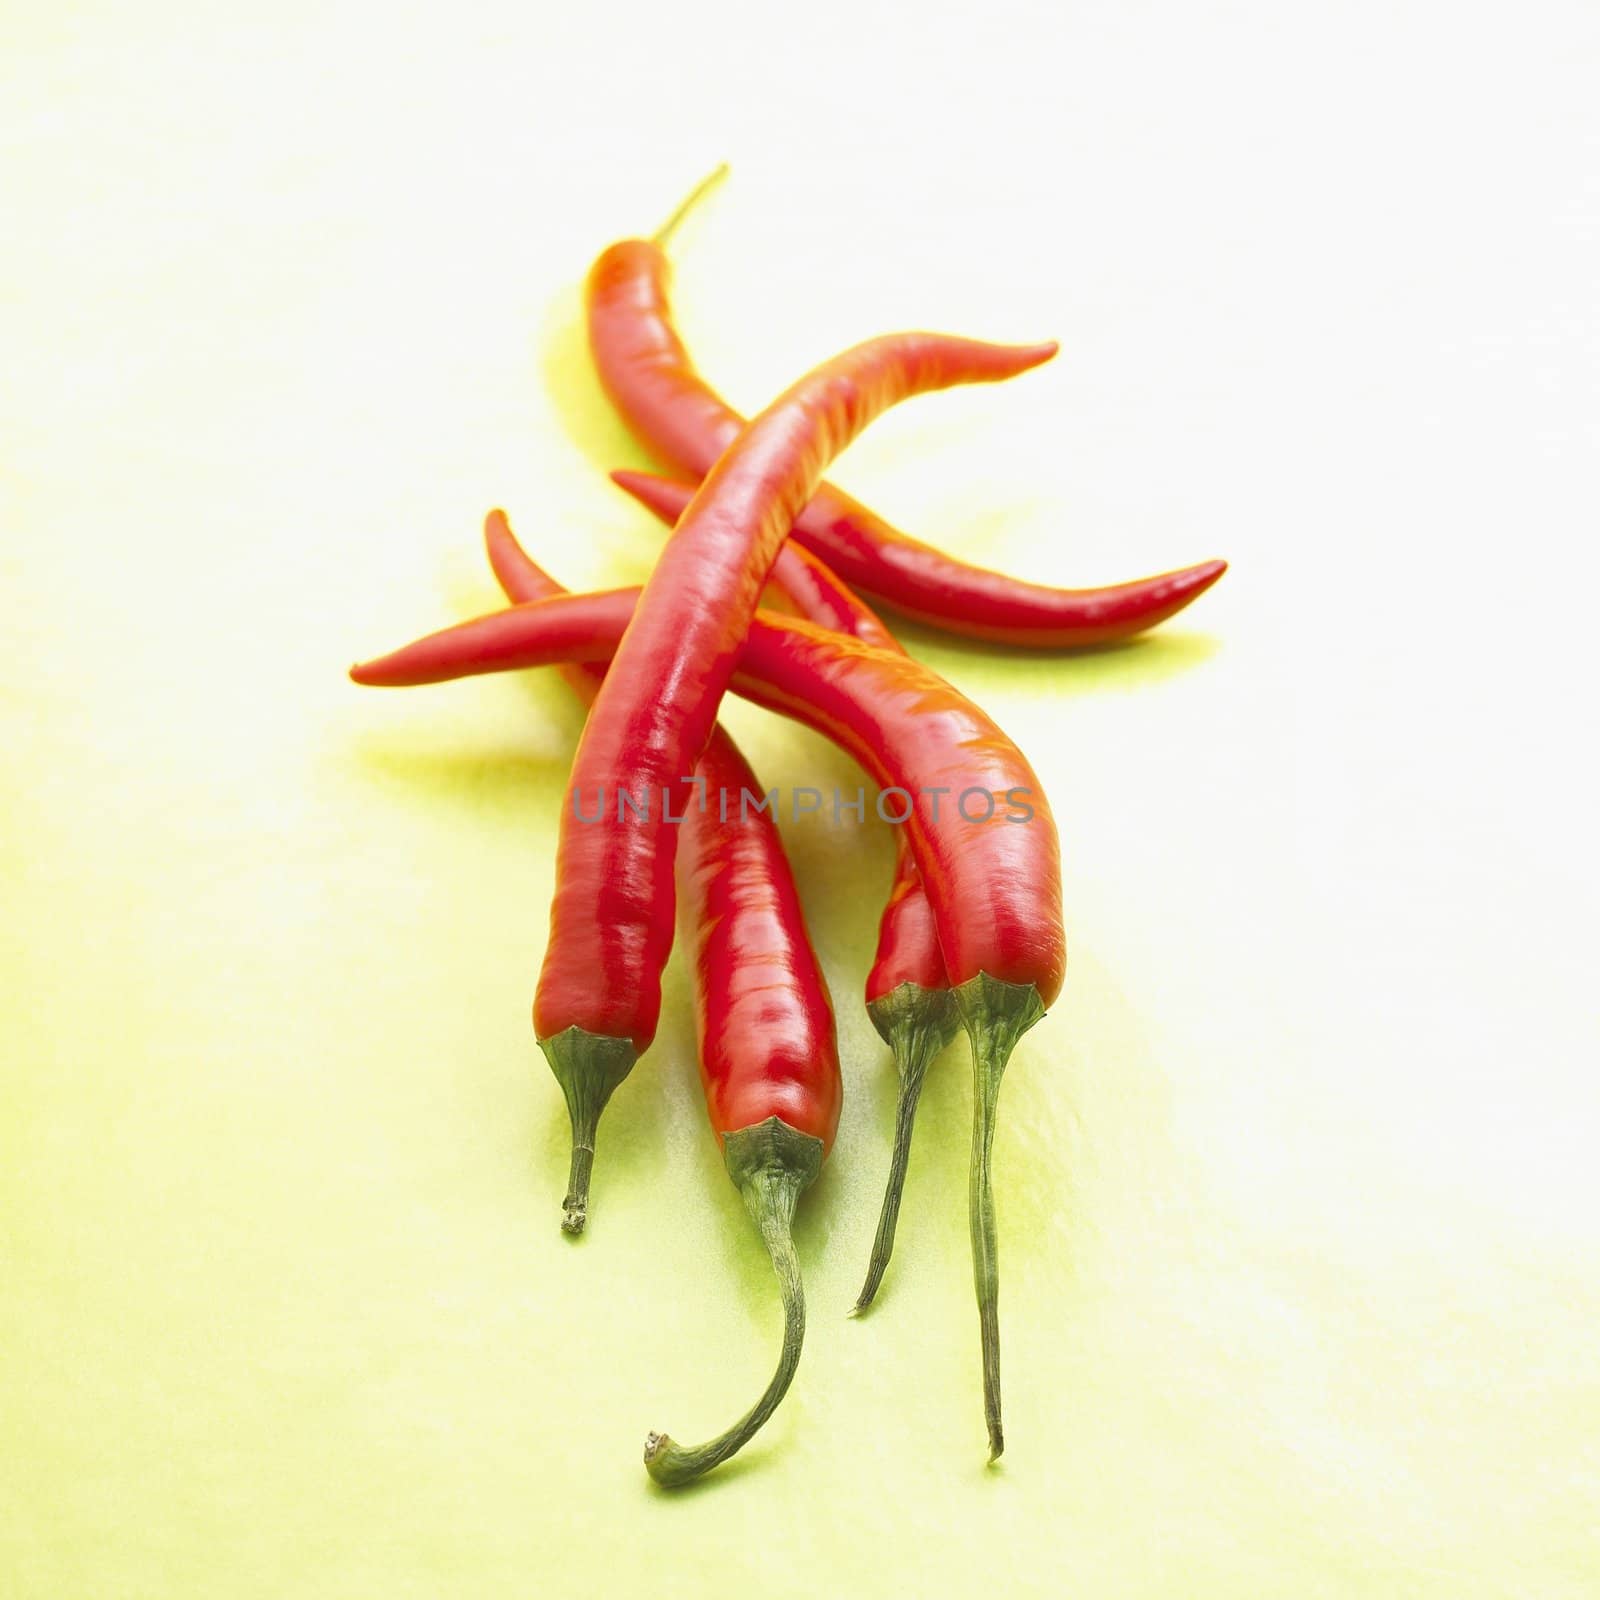 Red Chiles by tornellistefano